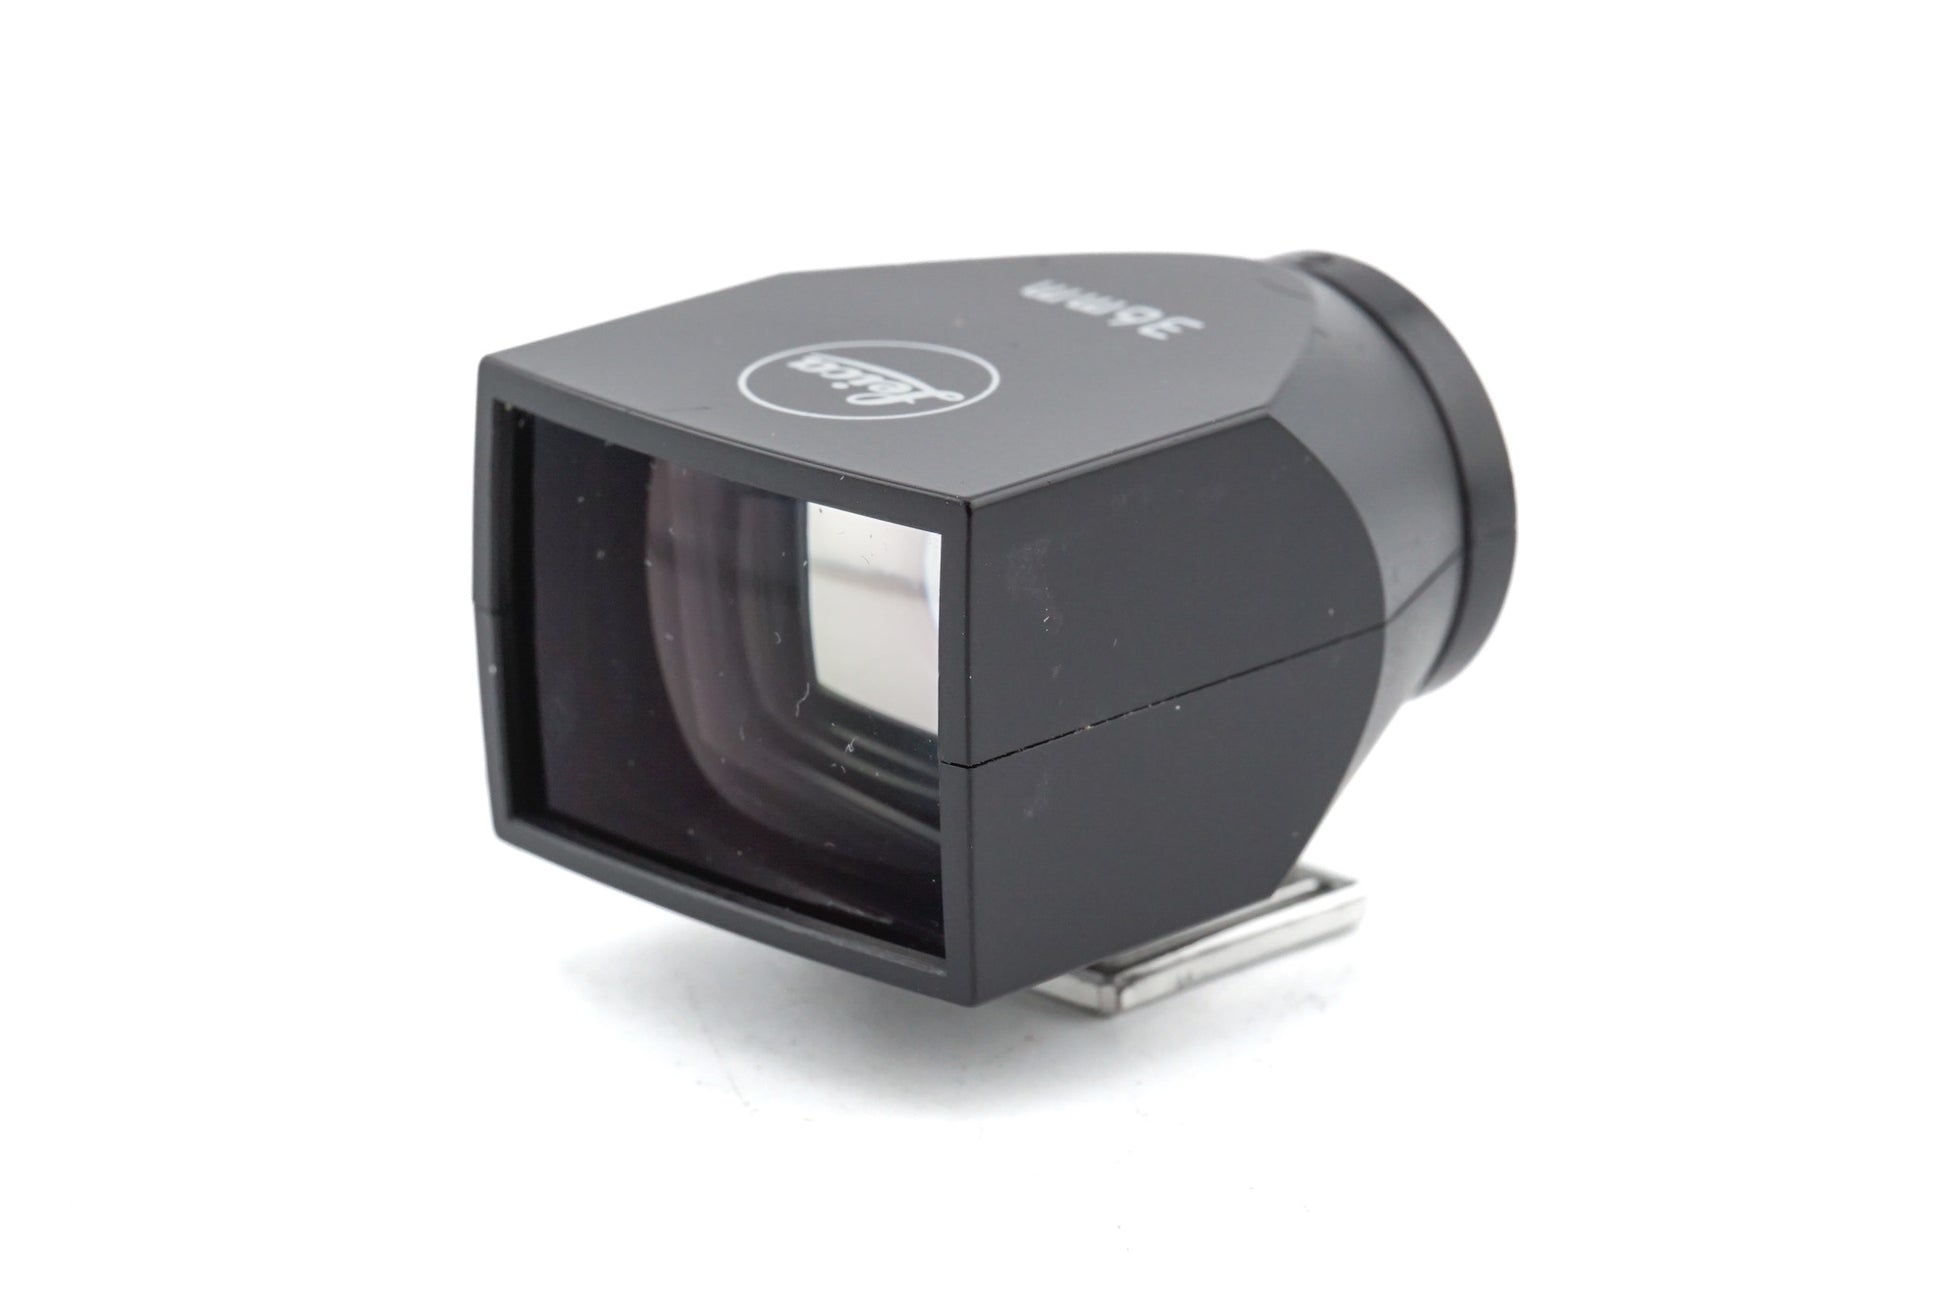 Brilliant Viewfinder For D-LUX 4